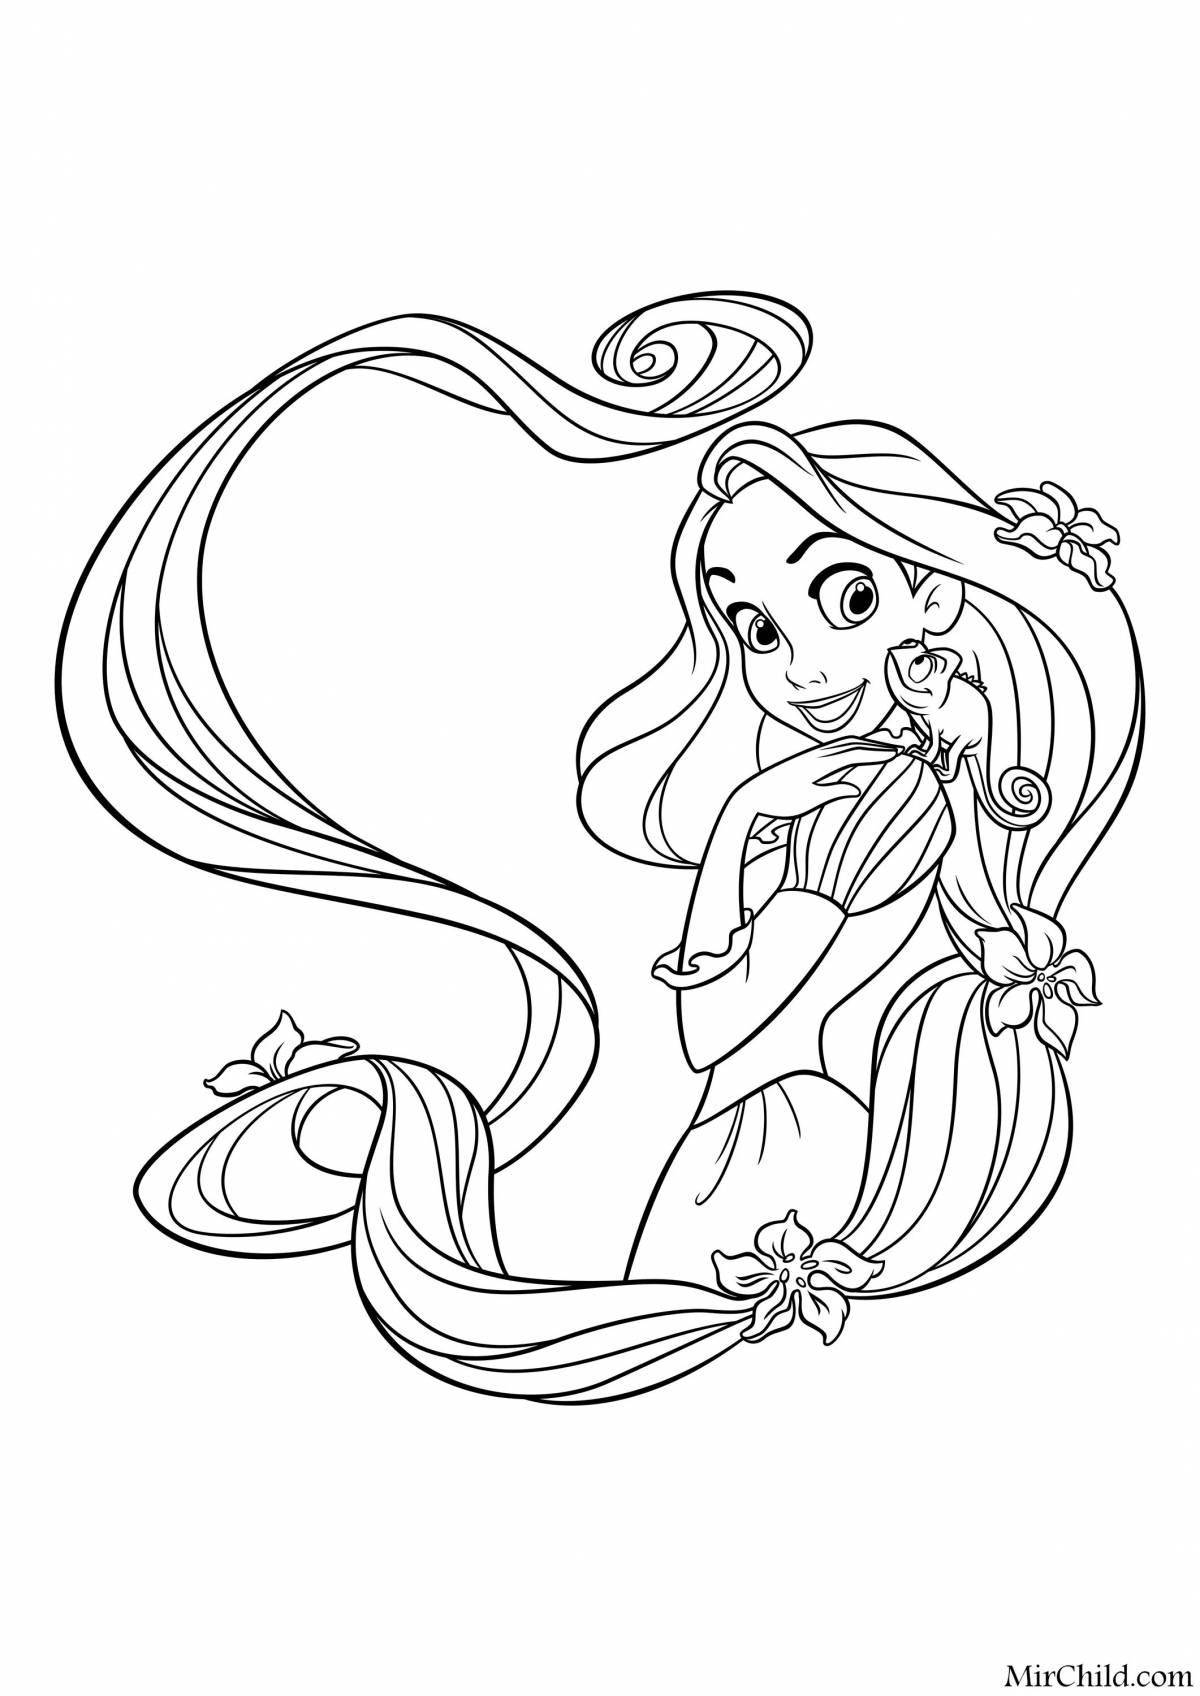 Amazing Rapunzel coloring book for kids 5-6 years old